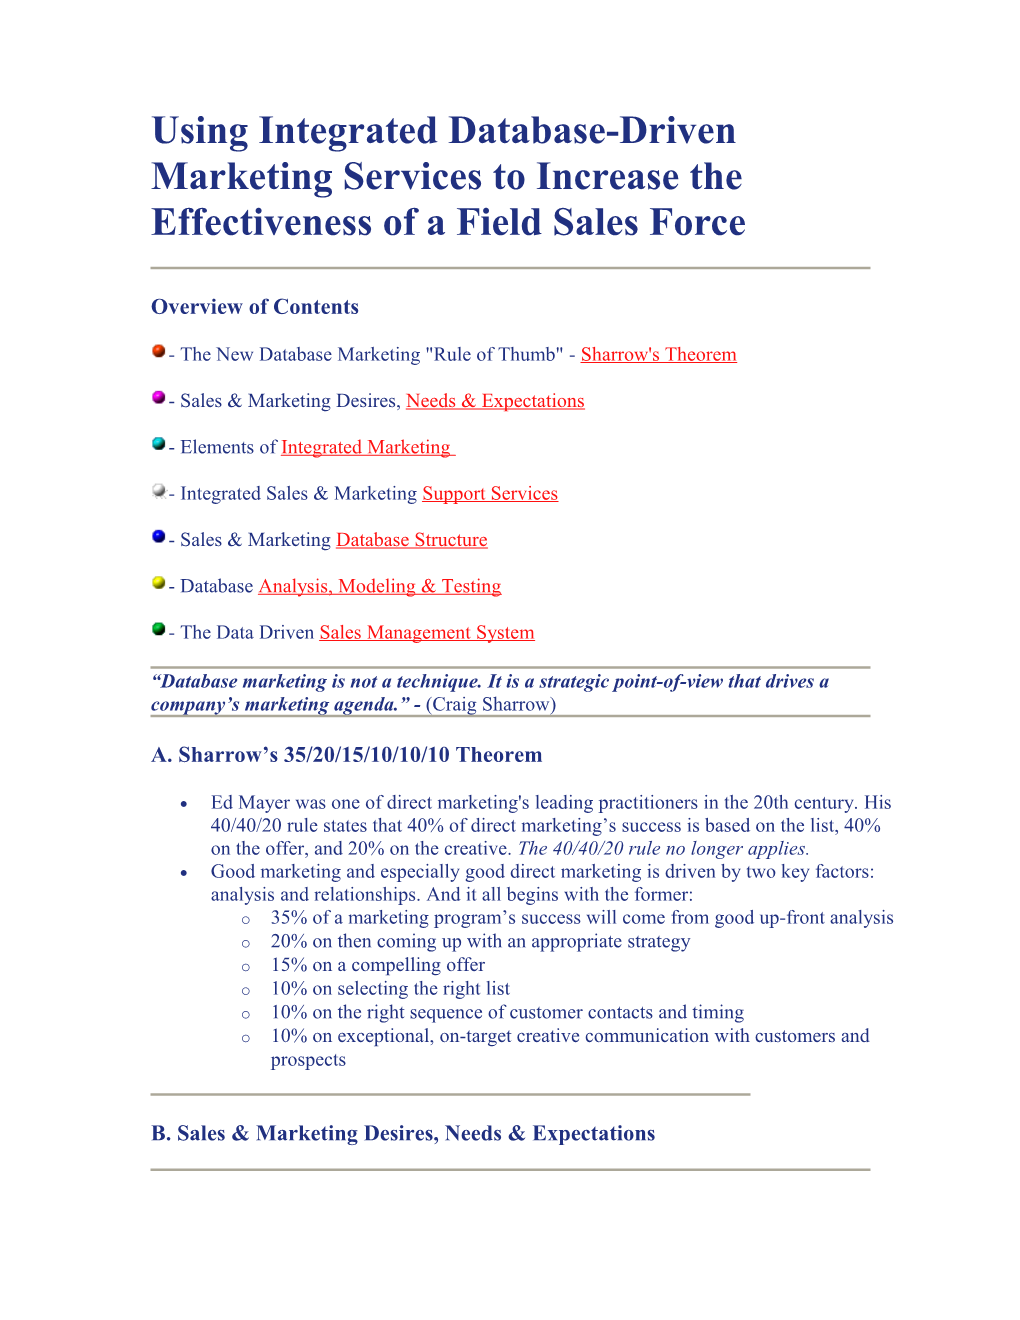 Using Integrated Database-Driven Marketing Services to Increase the Effectiveness of A